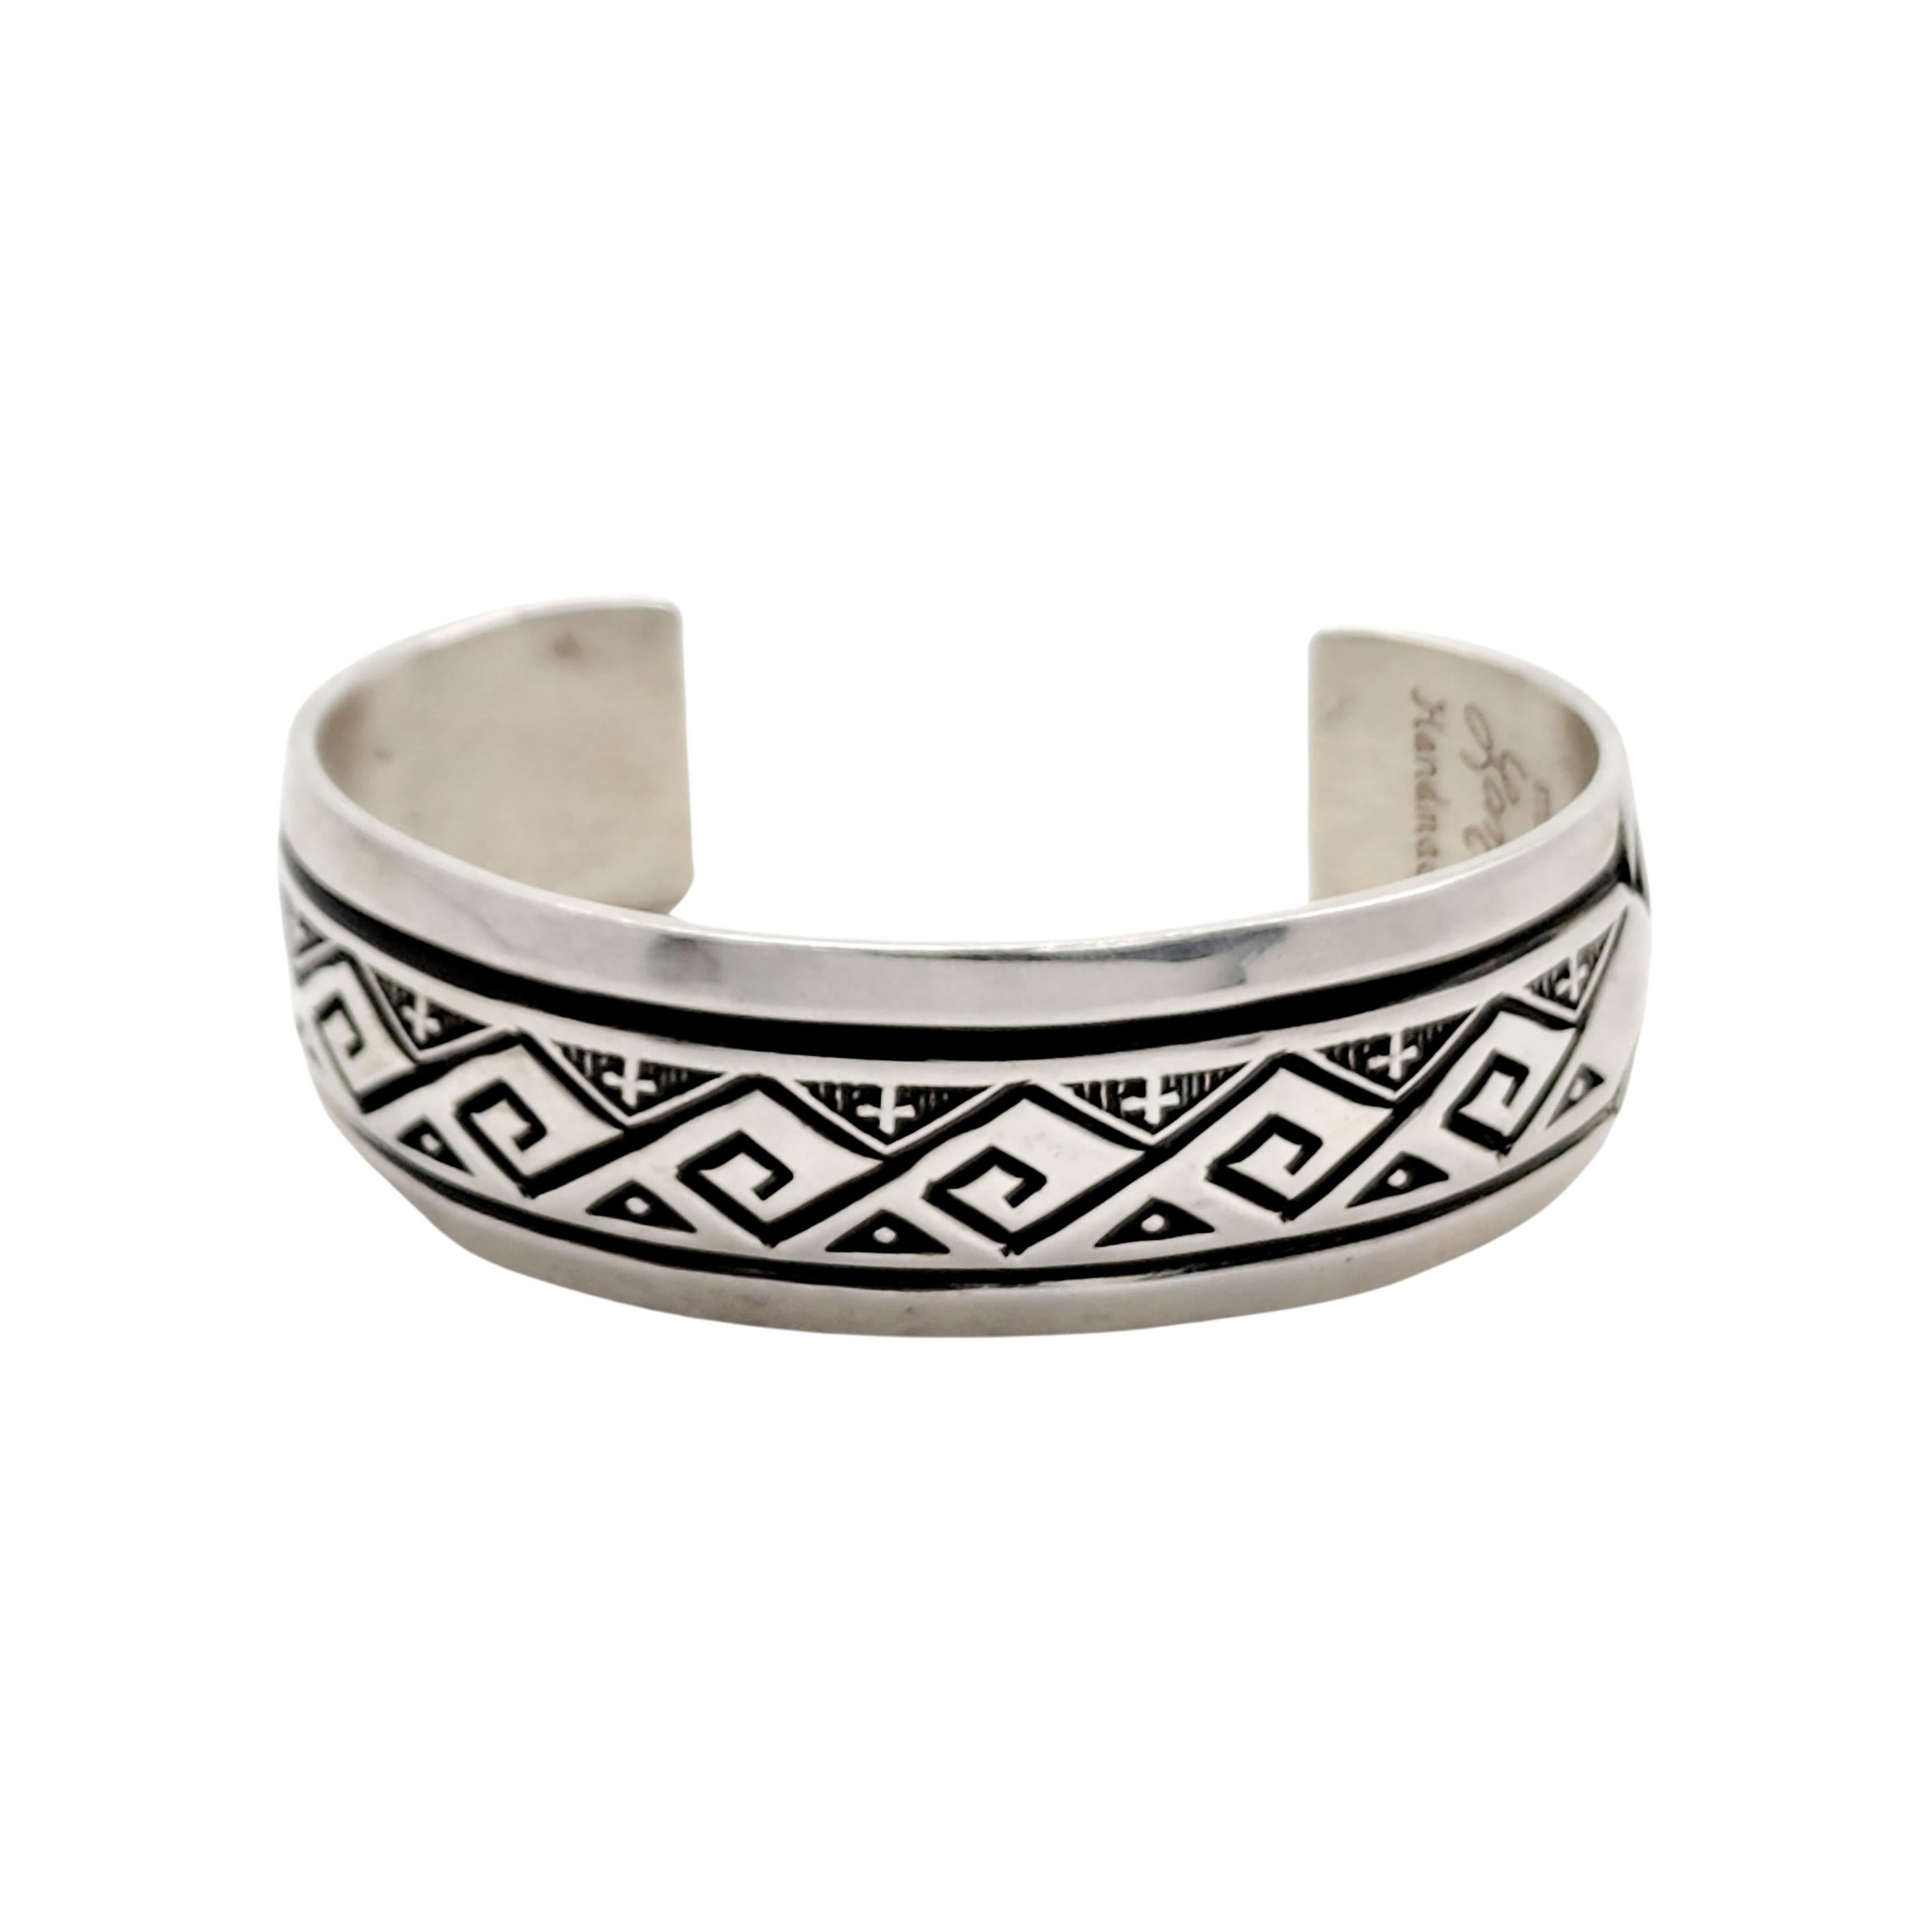 Sterling silver cuff bracelet by Native American artist Troy Lamer.

Navajo artisan, Troy Lamer, made this beautiful and ornate cuff bracelet by hand.

Measures approx 5 3/4